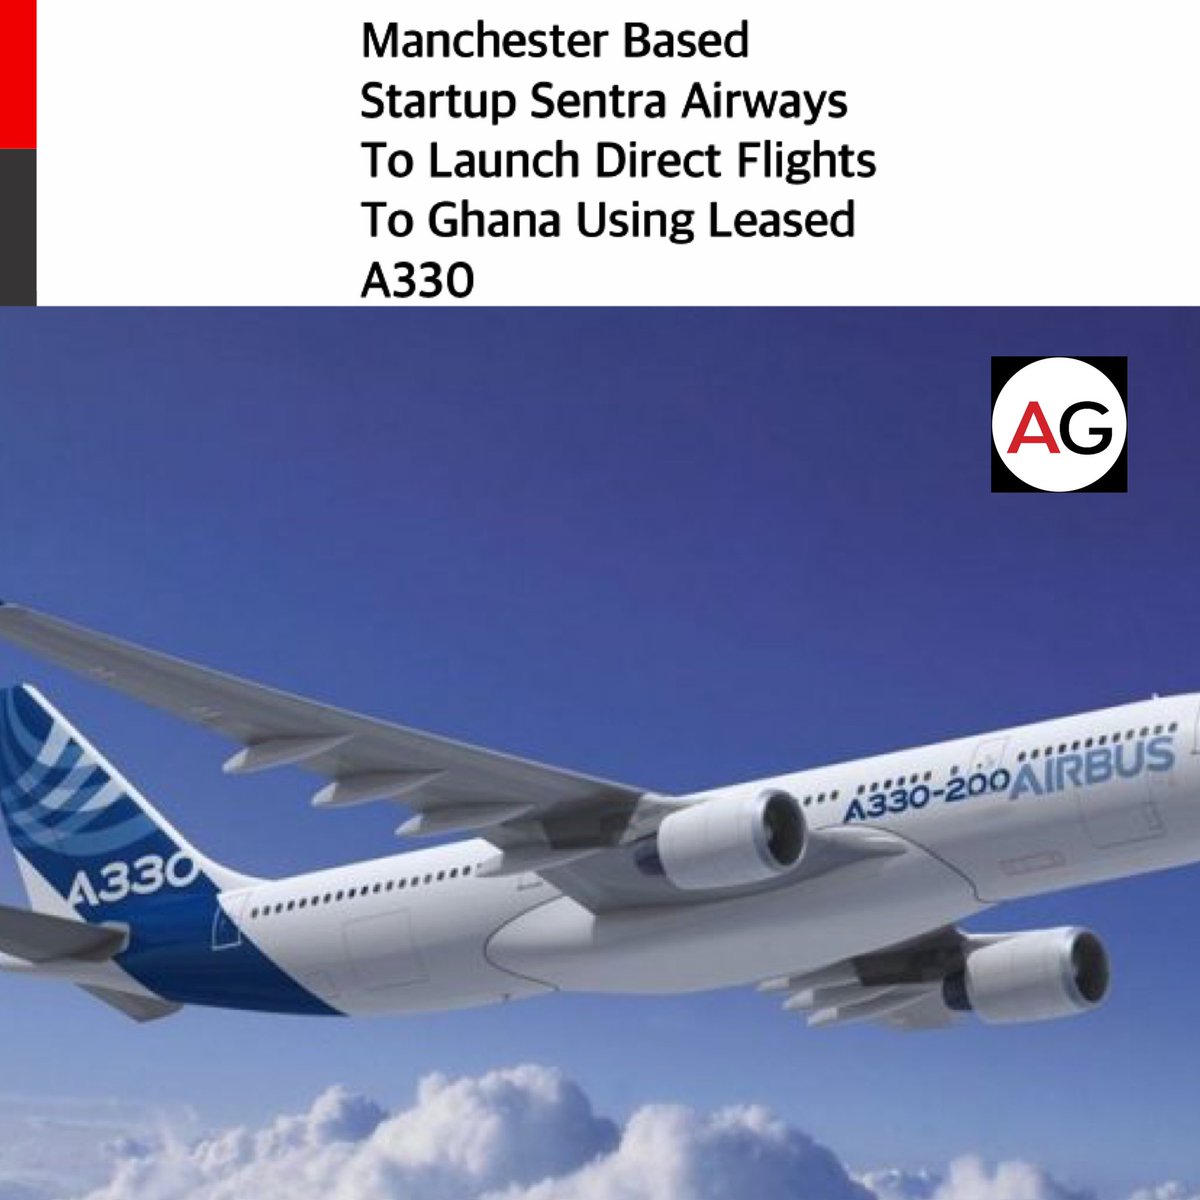 Tap on the link in the bio to read more 
Visit aviationghana.com to read more
AviationGhana 
#latestaviationstoriesinghana
#AviationGhana
#Aviationgh
#Aviation_gh
#Travels 
#Airlines 
#Tourism 
#ethiopianairline
#AirLease 
#SentraAirways 
#Manchester
#Accra